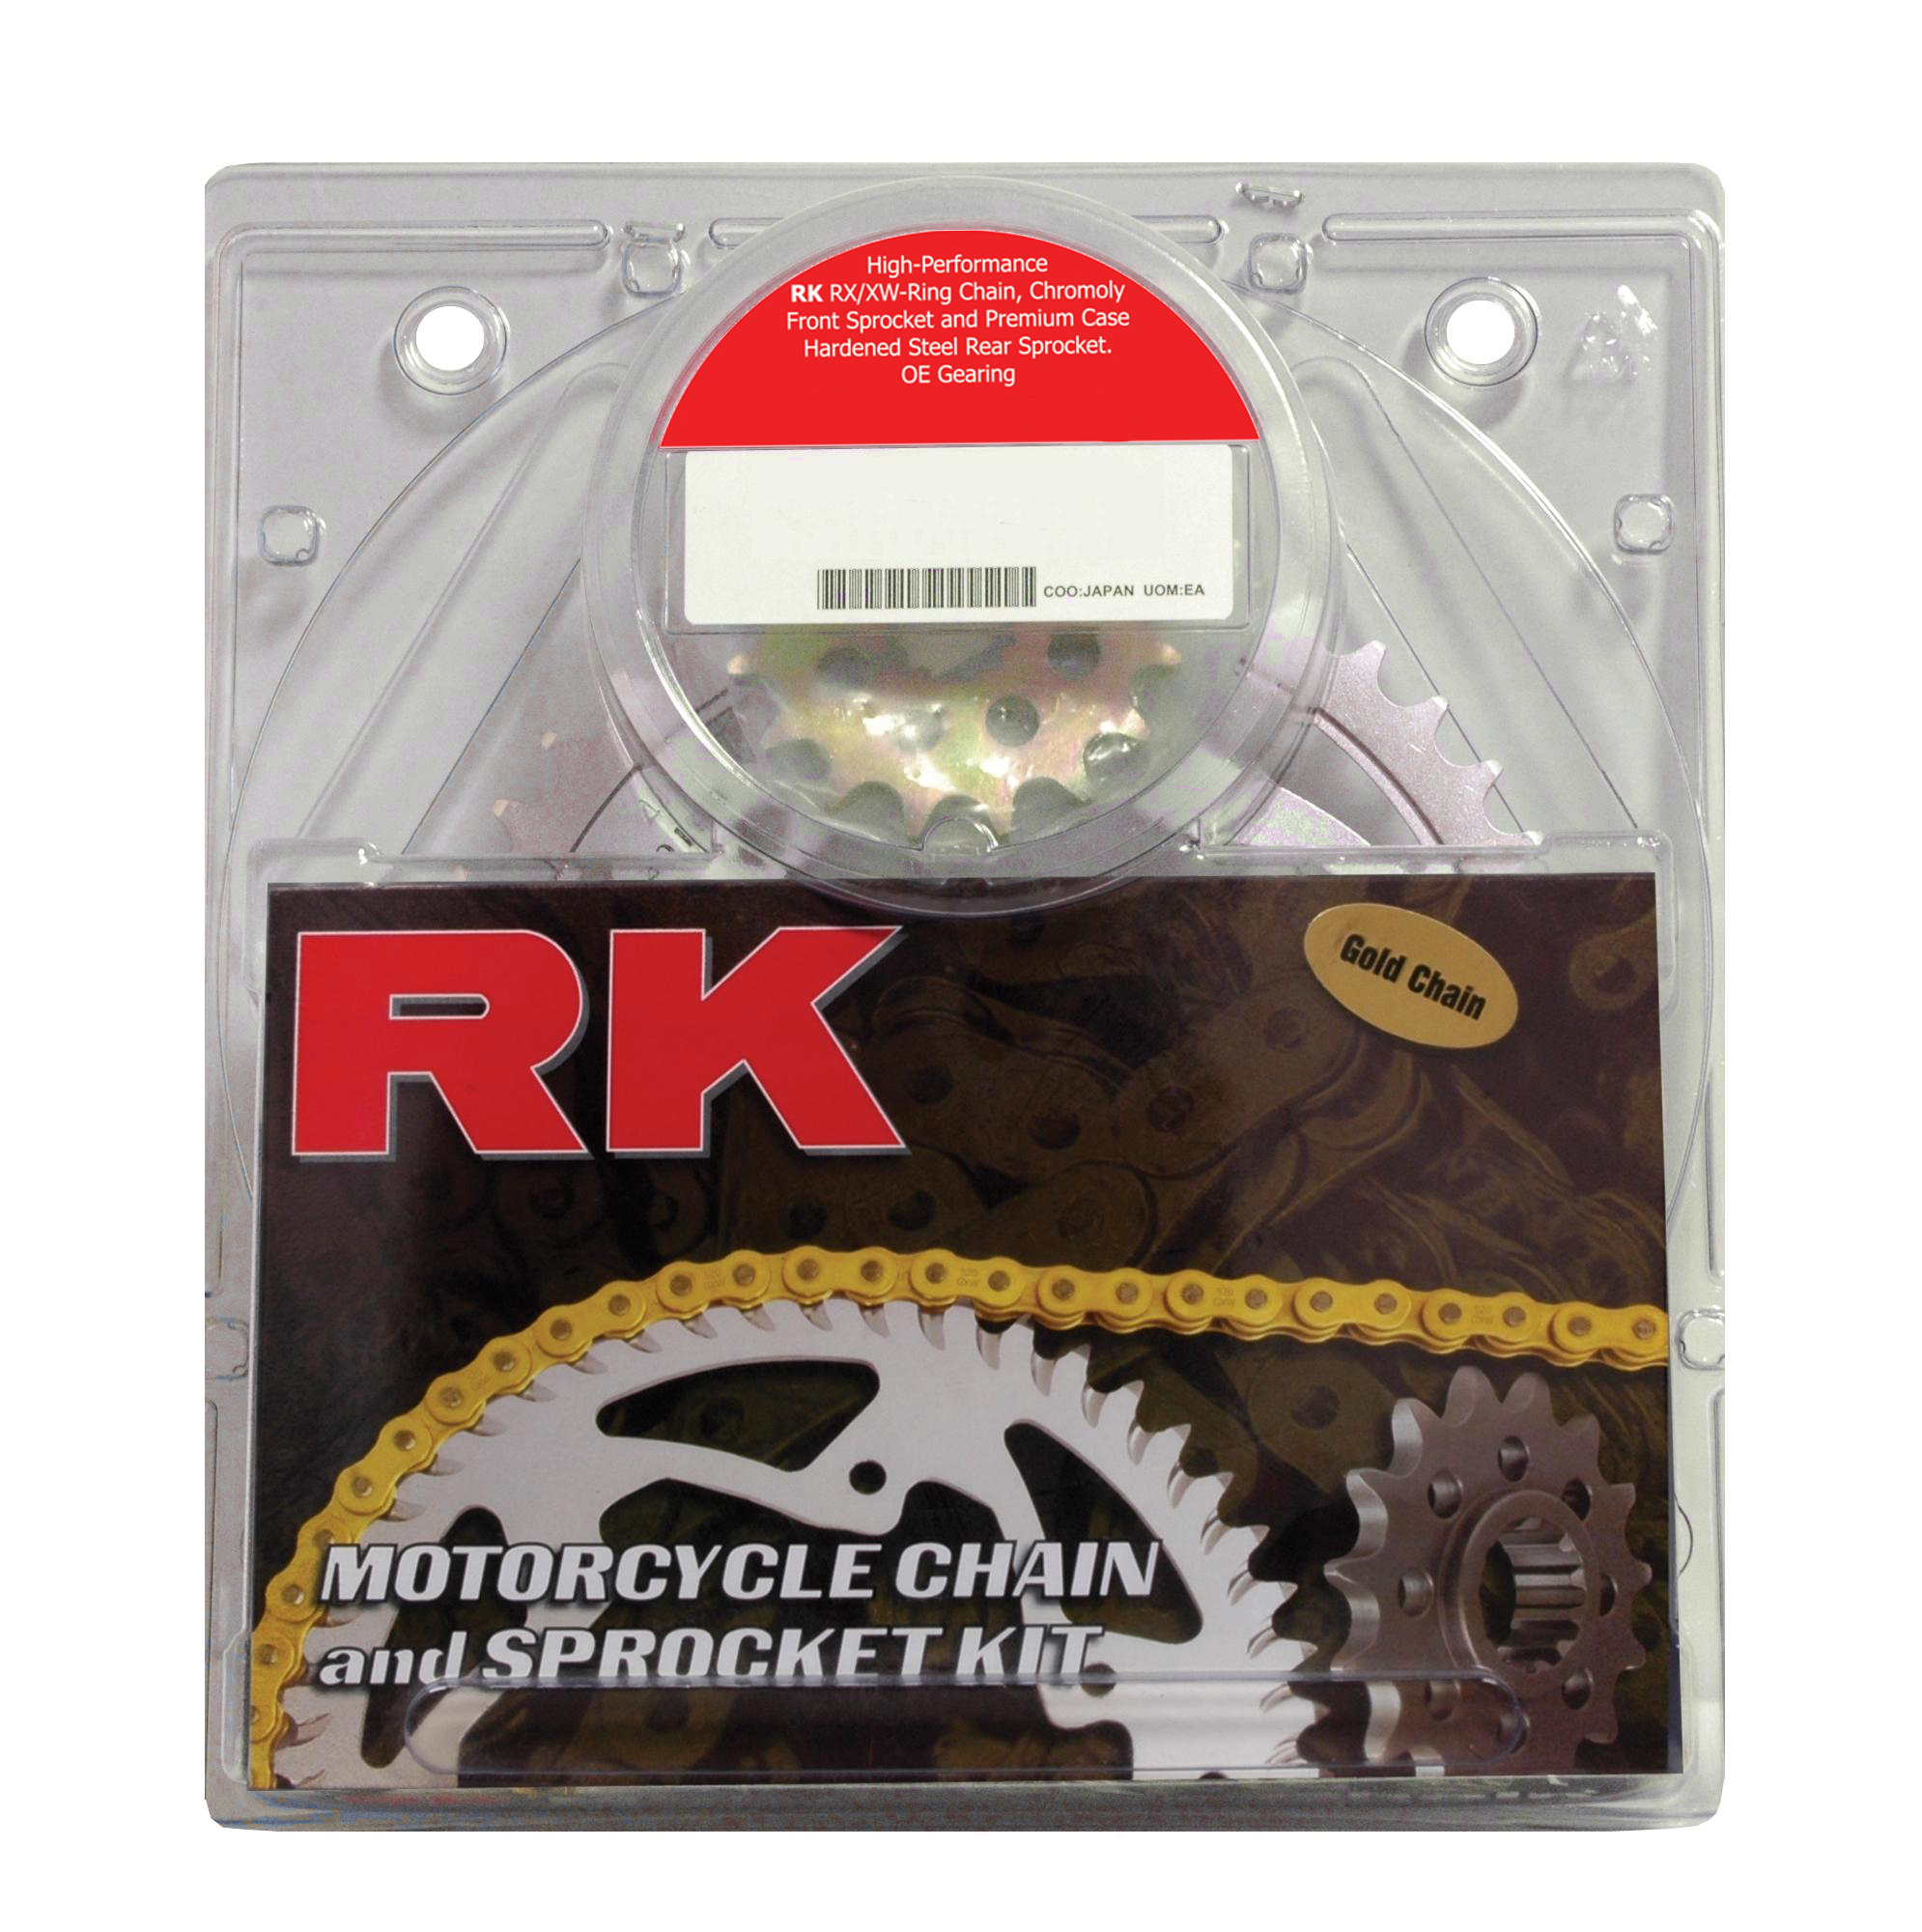 GB530XSOZ1-114 Chain 15/42 Steel Sprocket Kit - RK Excel Chain & Sprocket Kit - Click Image to Close